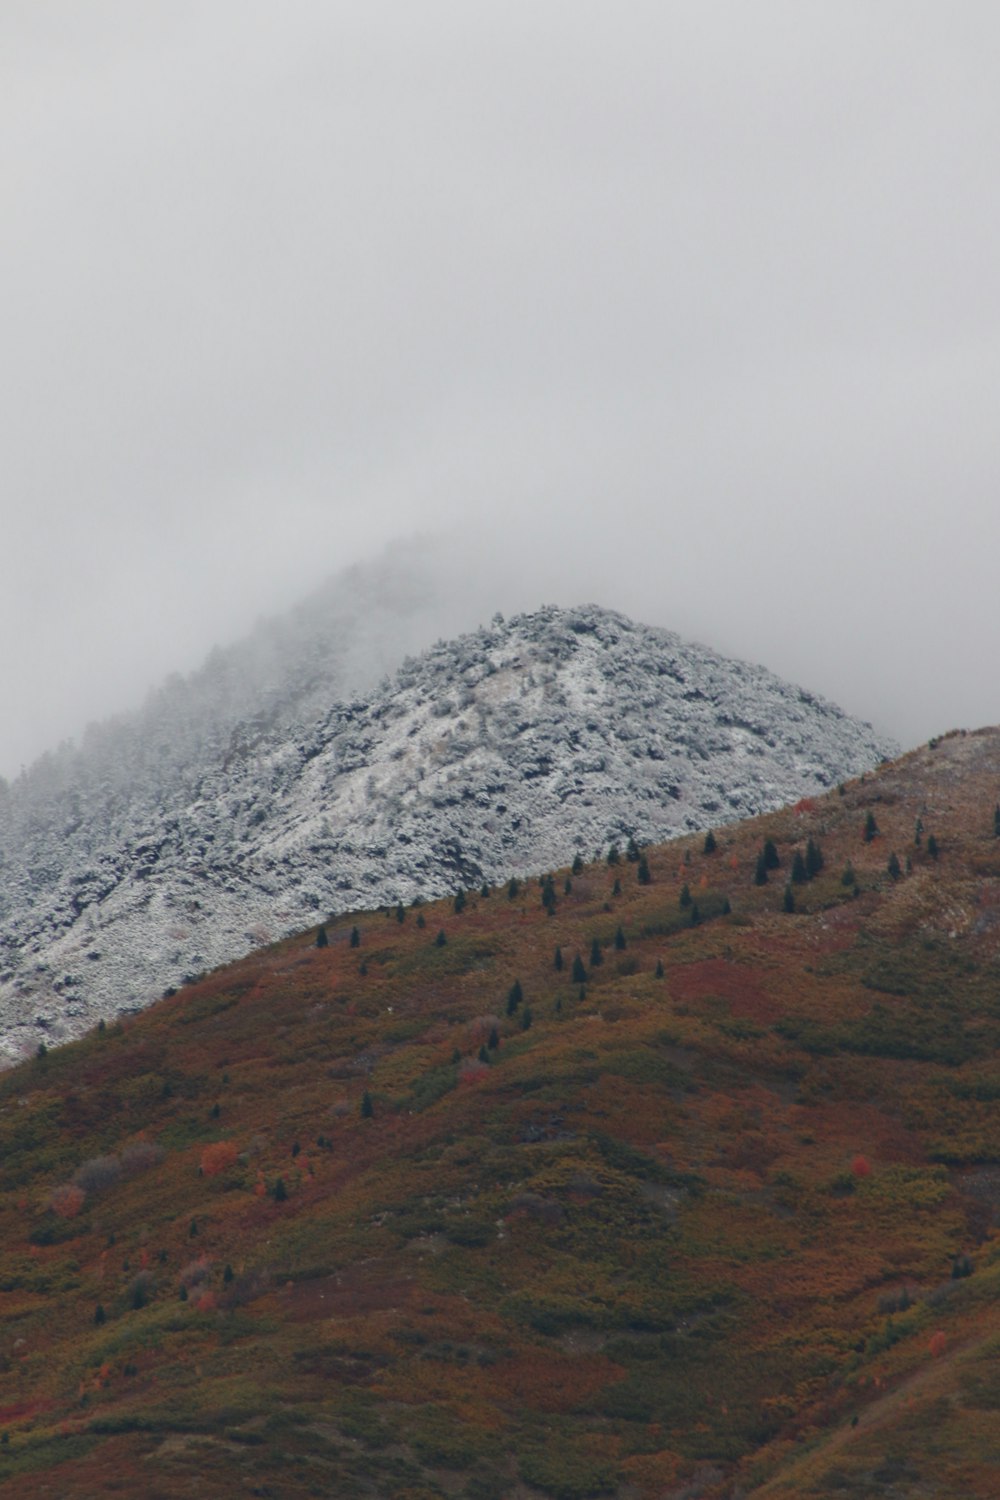 a mountain covered in snow and trees on a cloudy day